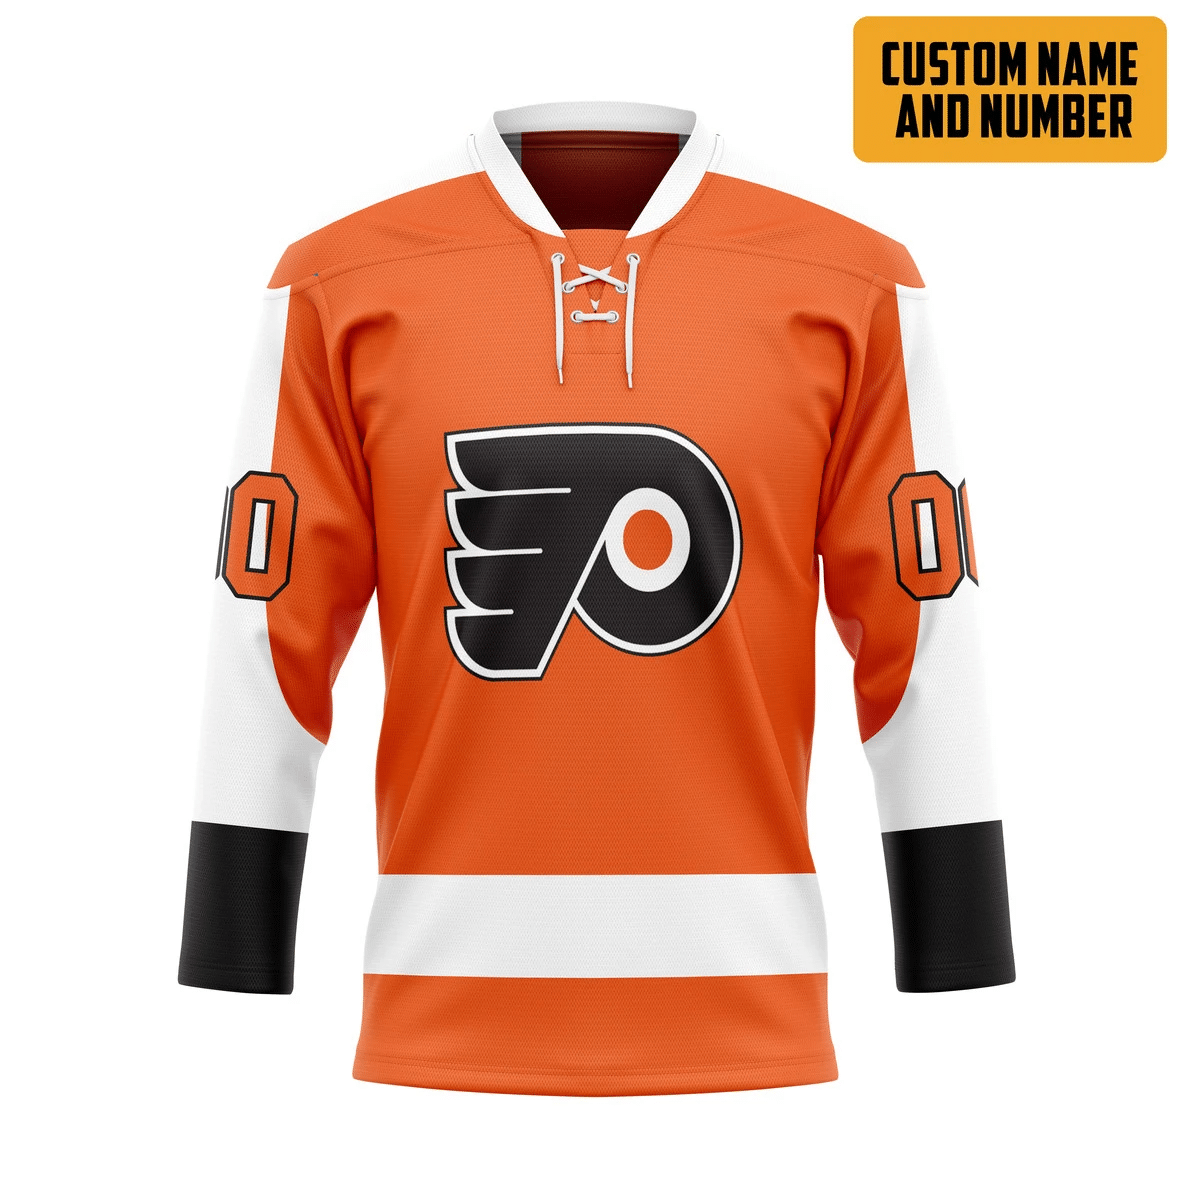 Top cool Hockey jersey for fan You can buy online. 26